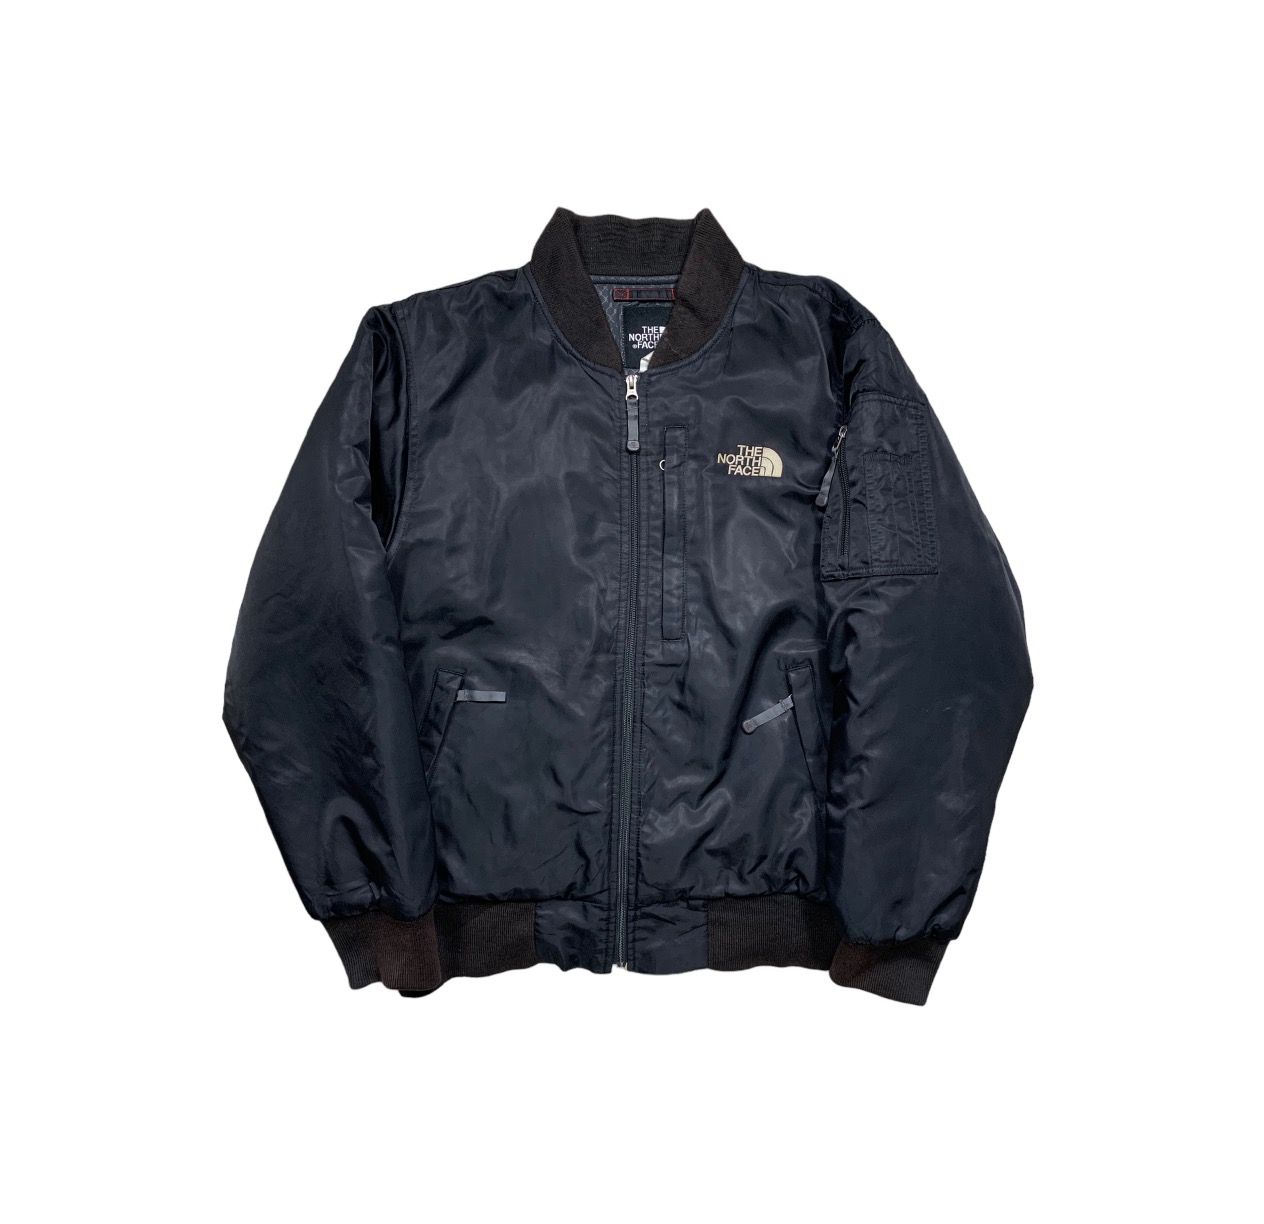 Archival Clothing Rare The North Face Bomber Jacket Multi Pocket | Grailed